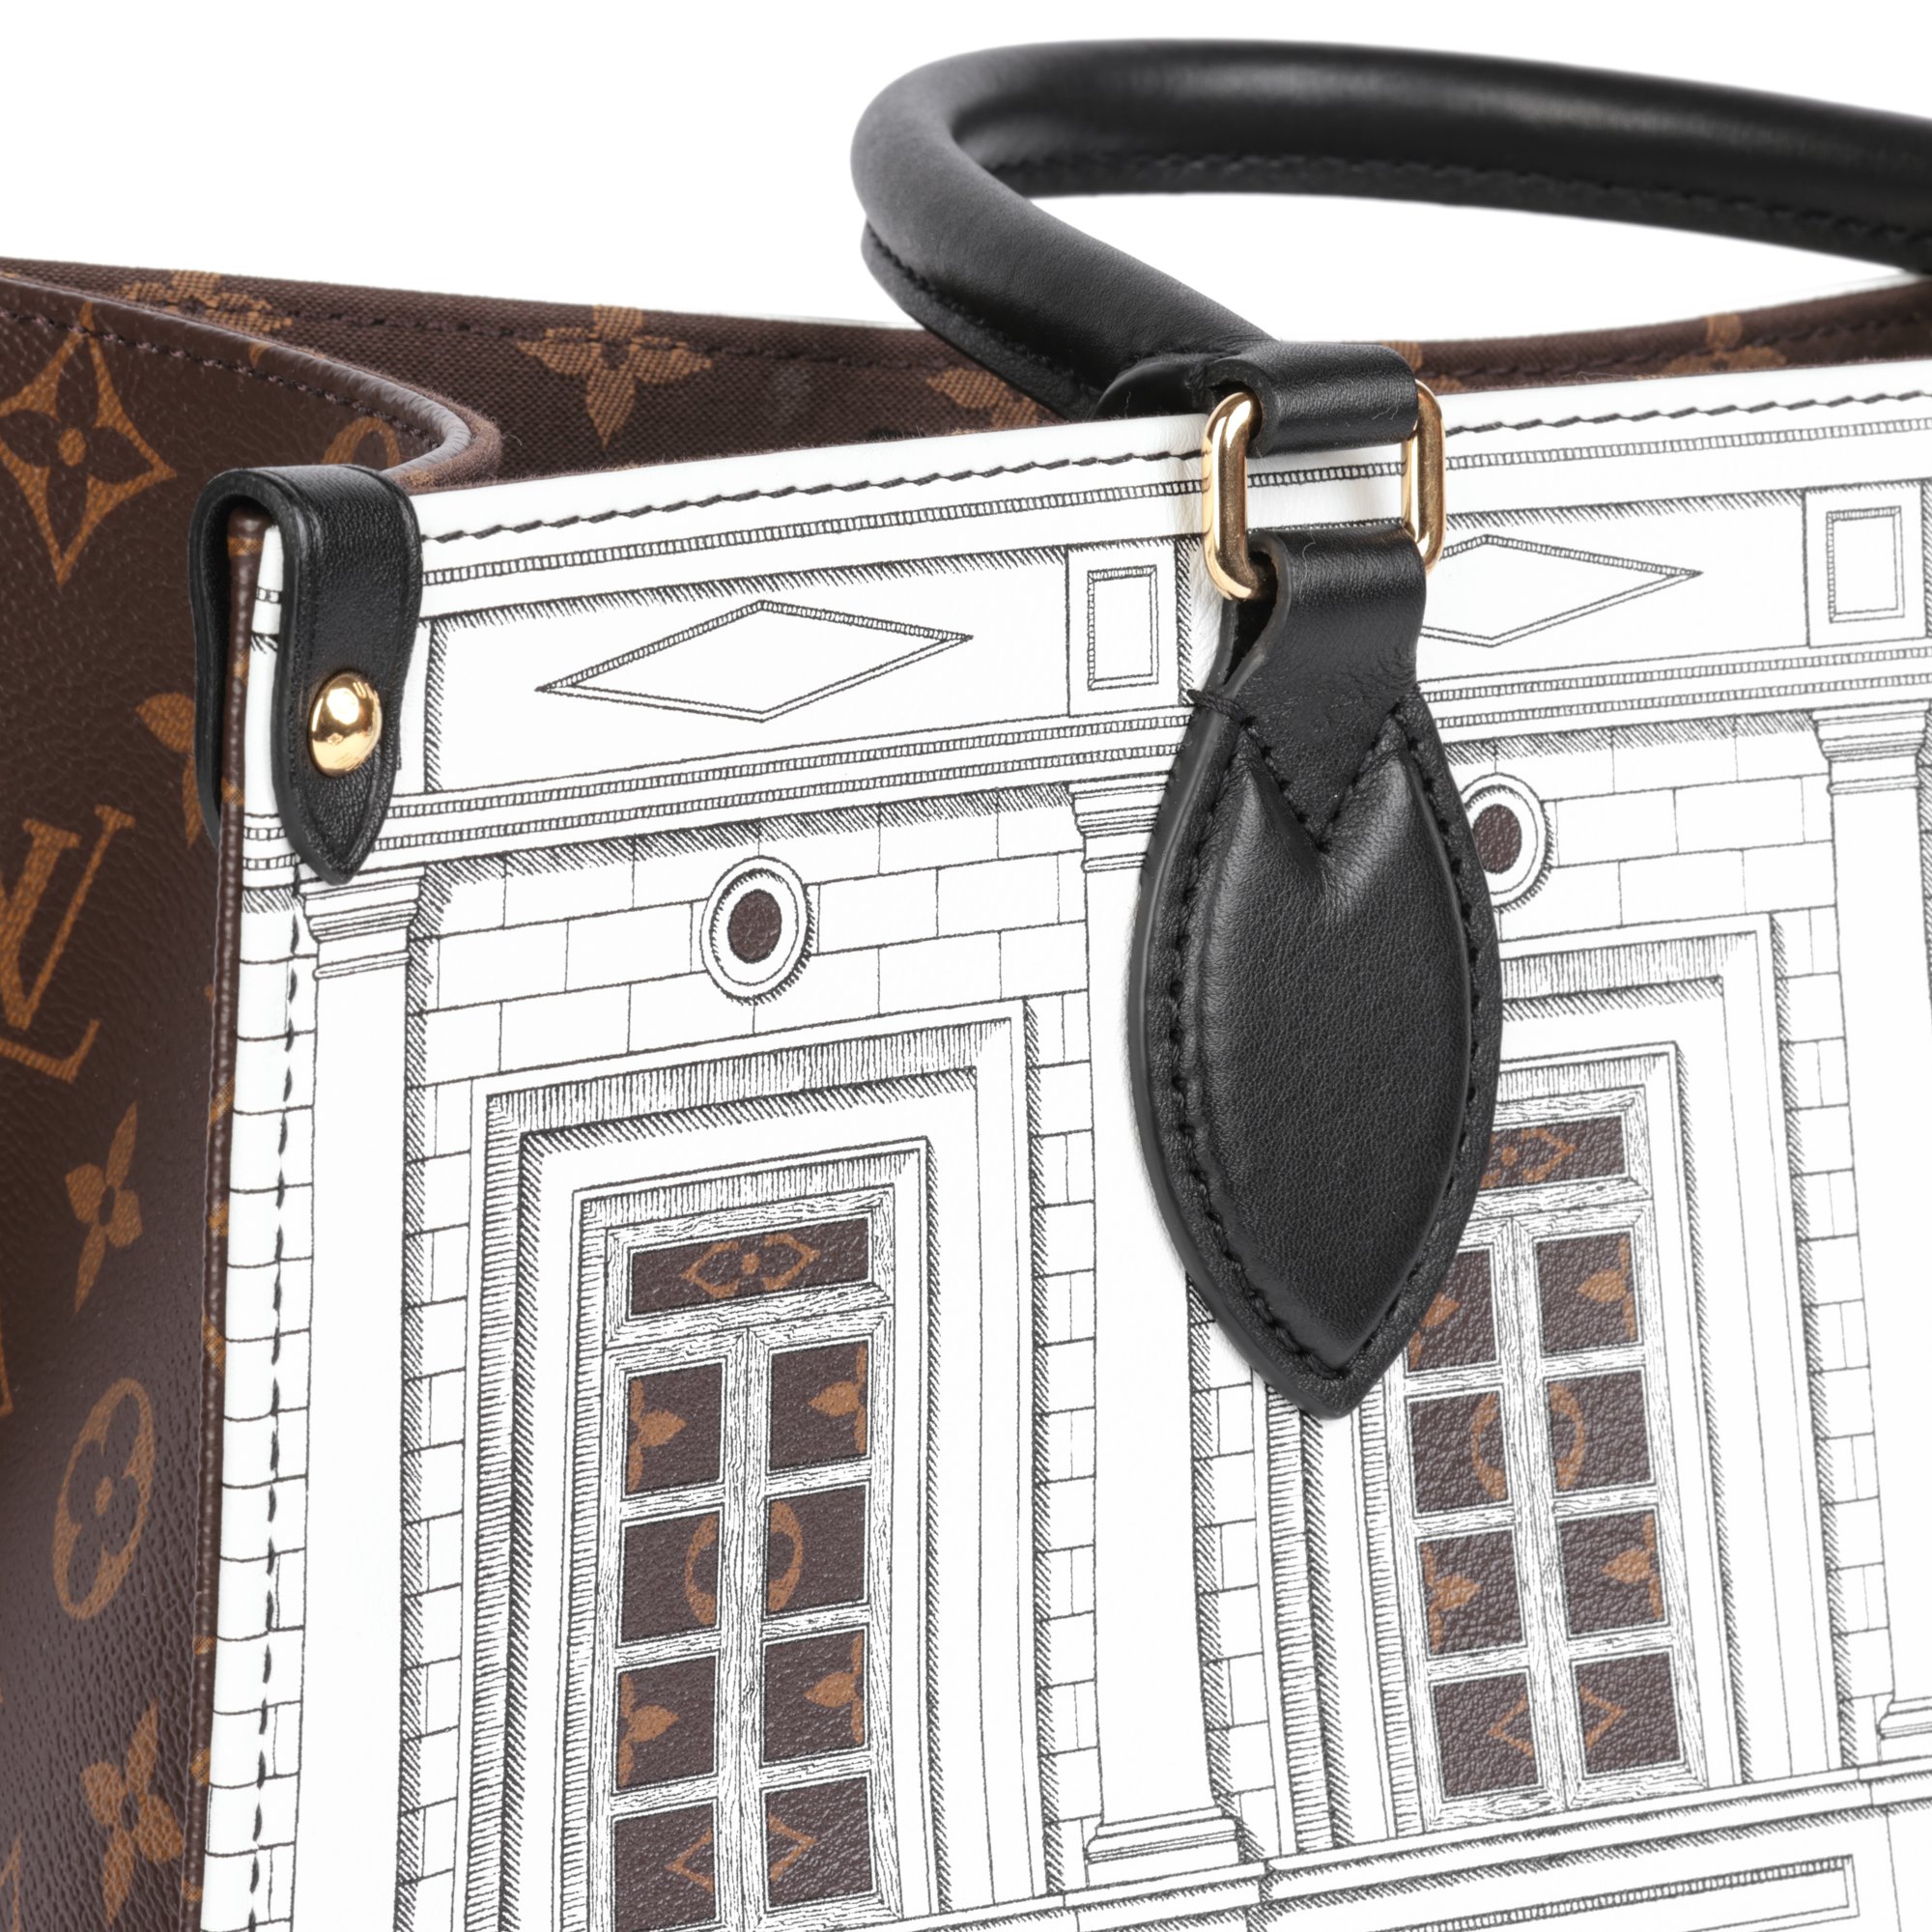 Louis Vuitton x Fornasetti Brown Monogram Coated Canvas & Black Calfskin Leather Onthego GM